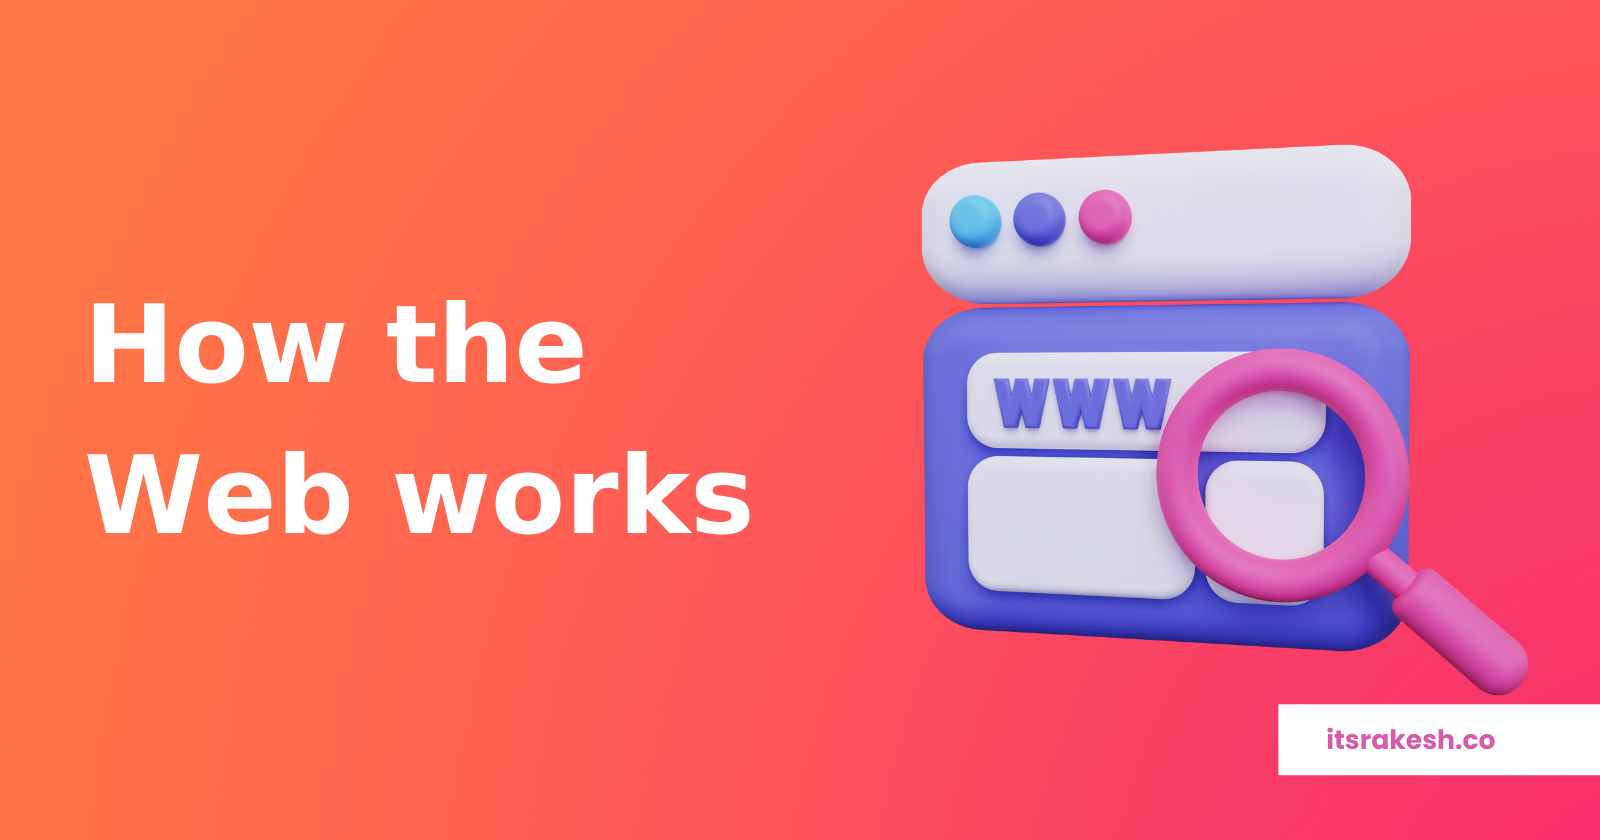 How does the Web work - Behind the scenes (URL to Webpage)